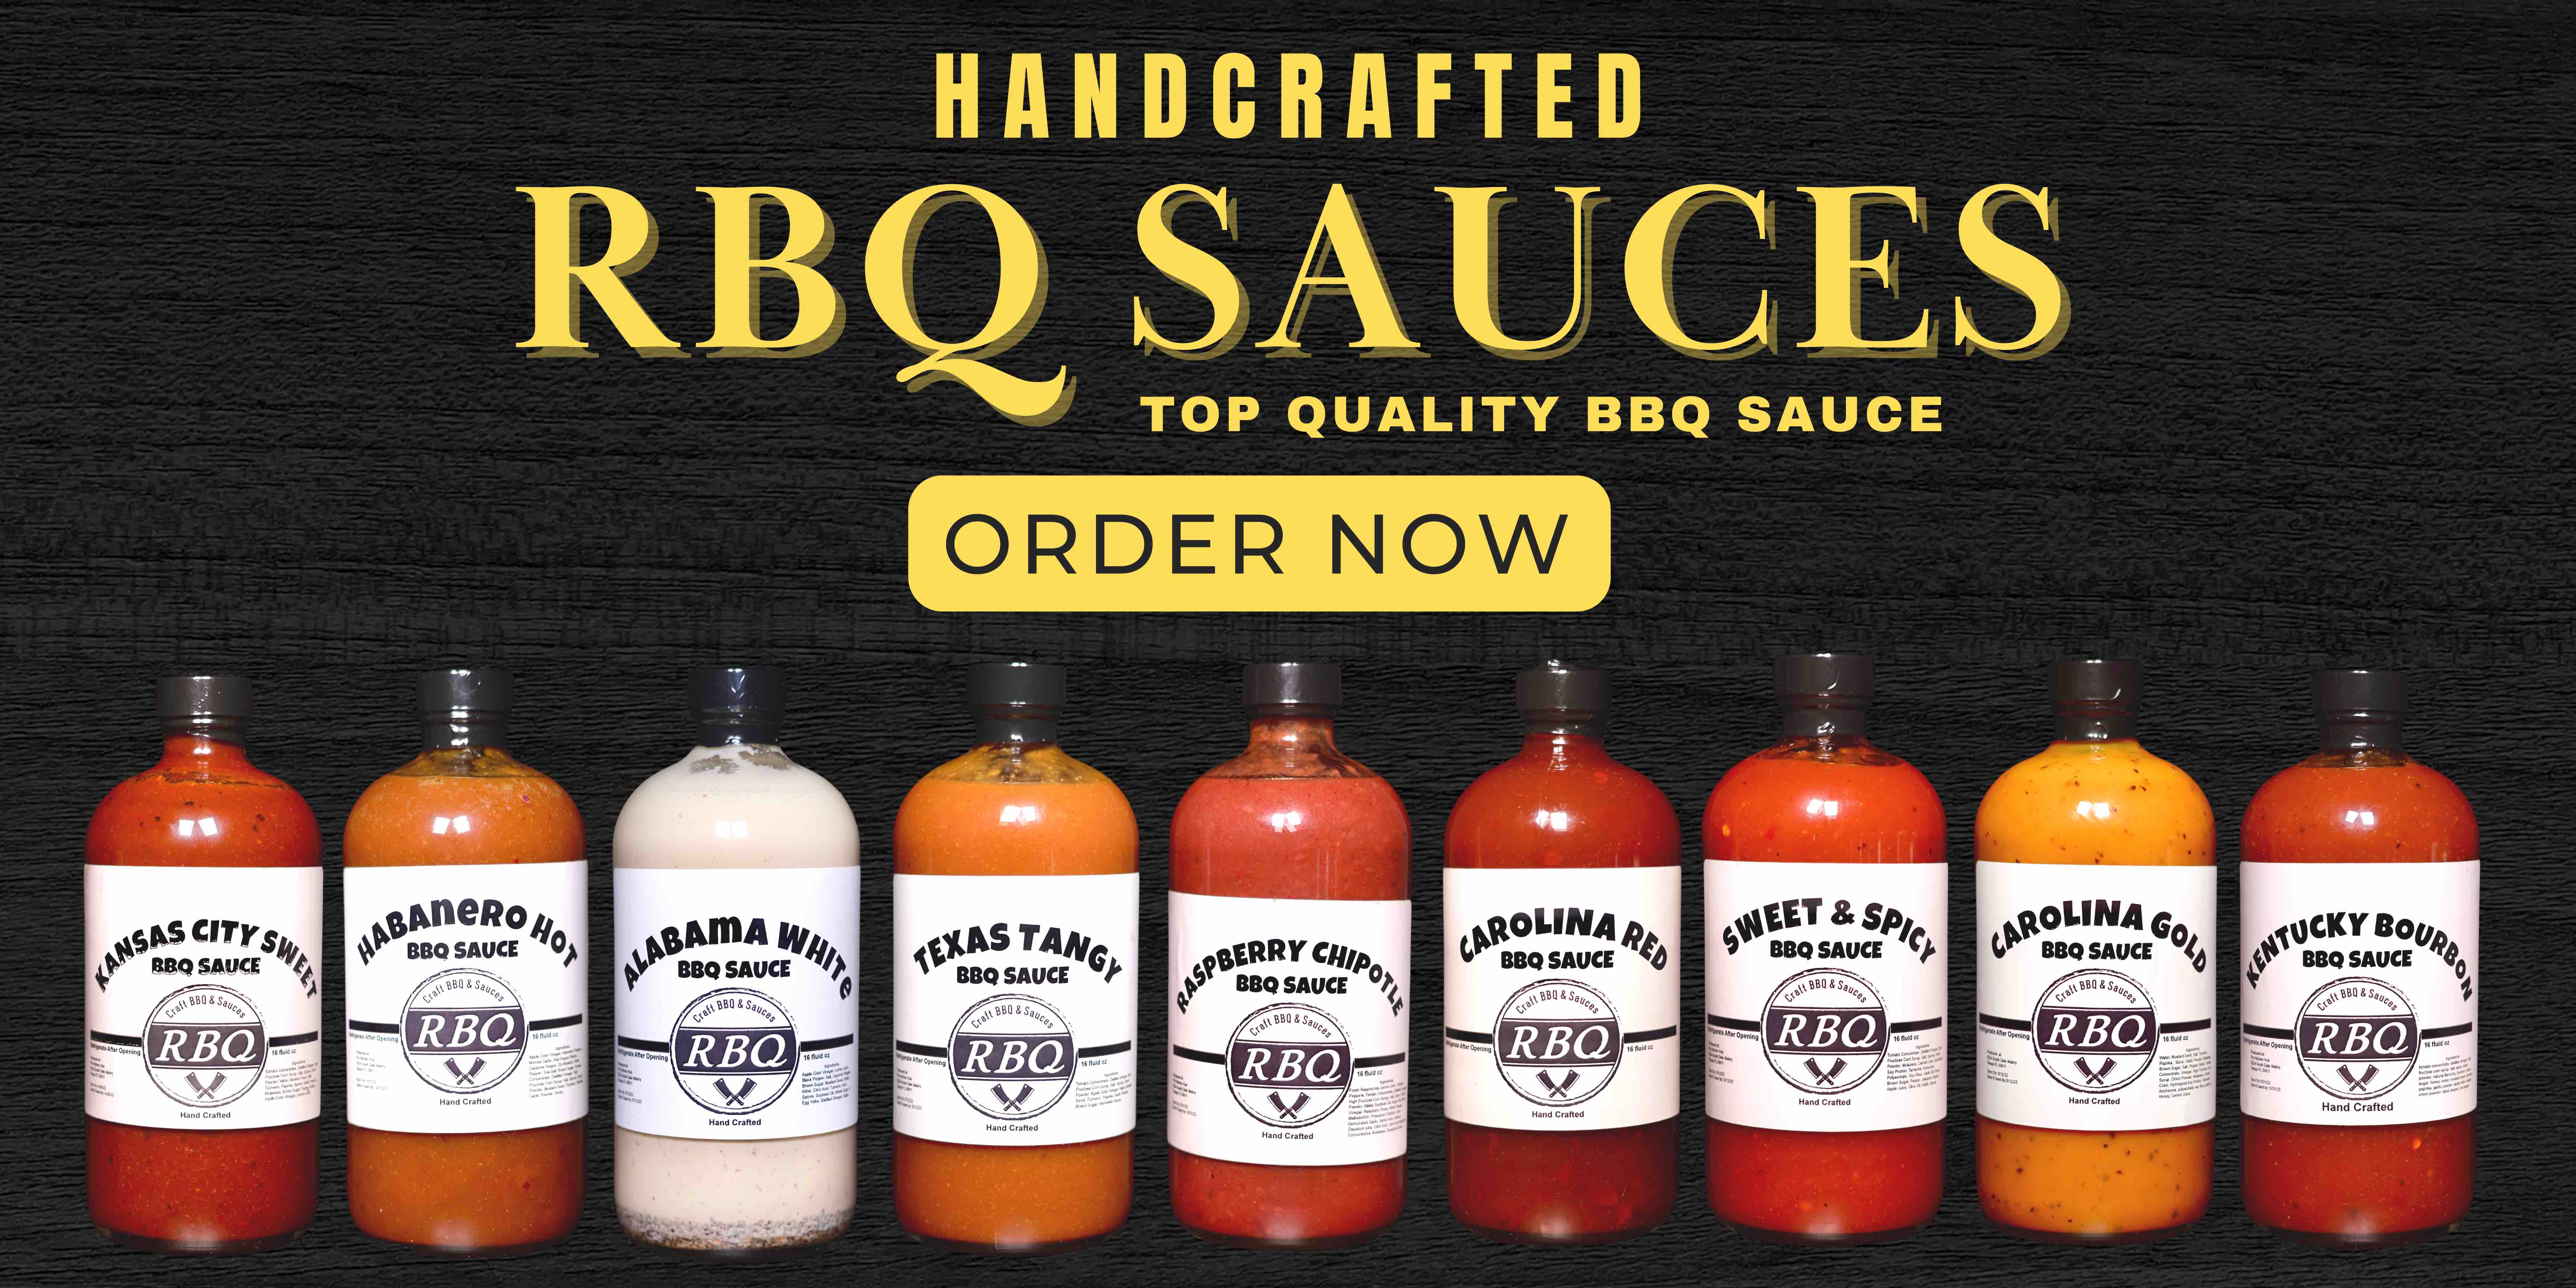 Handcrafted RBQ Sauces The Best Quality BBQ Sauces Order Now at the top with 9 different bottles of BBQ sauces from left to right: Kansas City Sweet, Haberno Hot, Alabama White, Texas Tangy, Raspberry Chiptole, Carolna Red, Sweet & Tangy, Carolina Gold, and Kentucky Bourbon